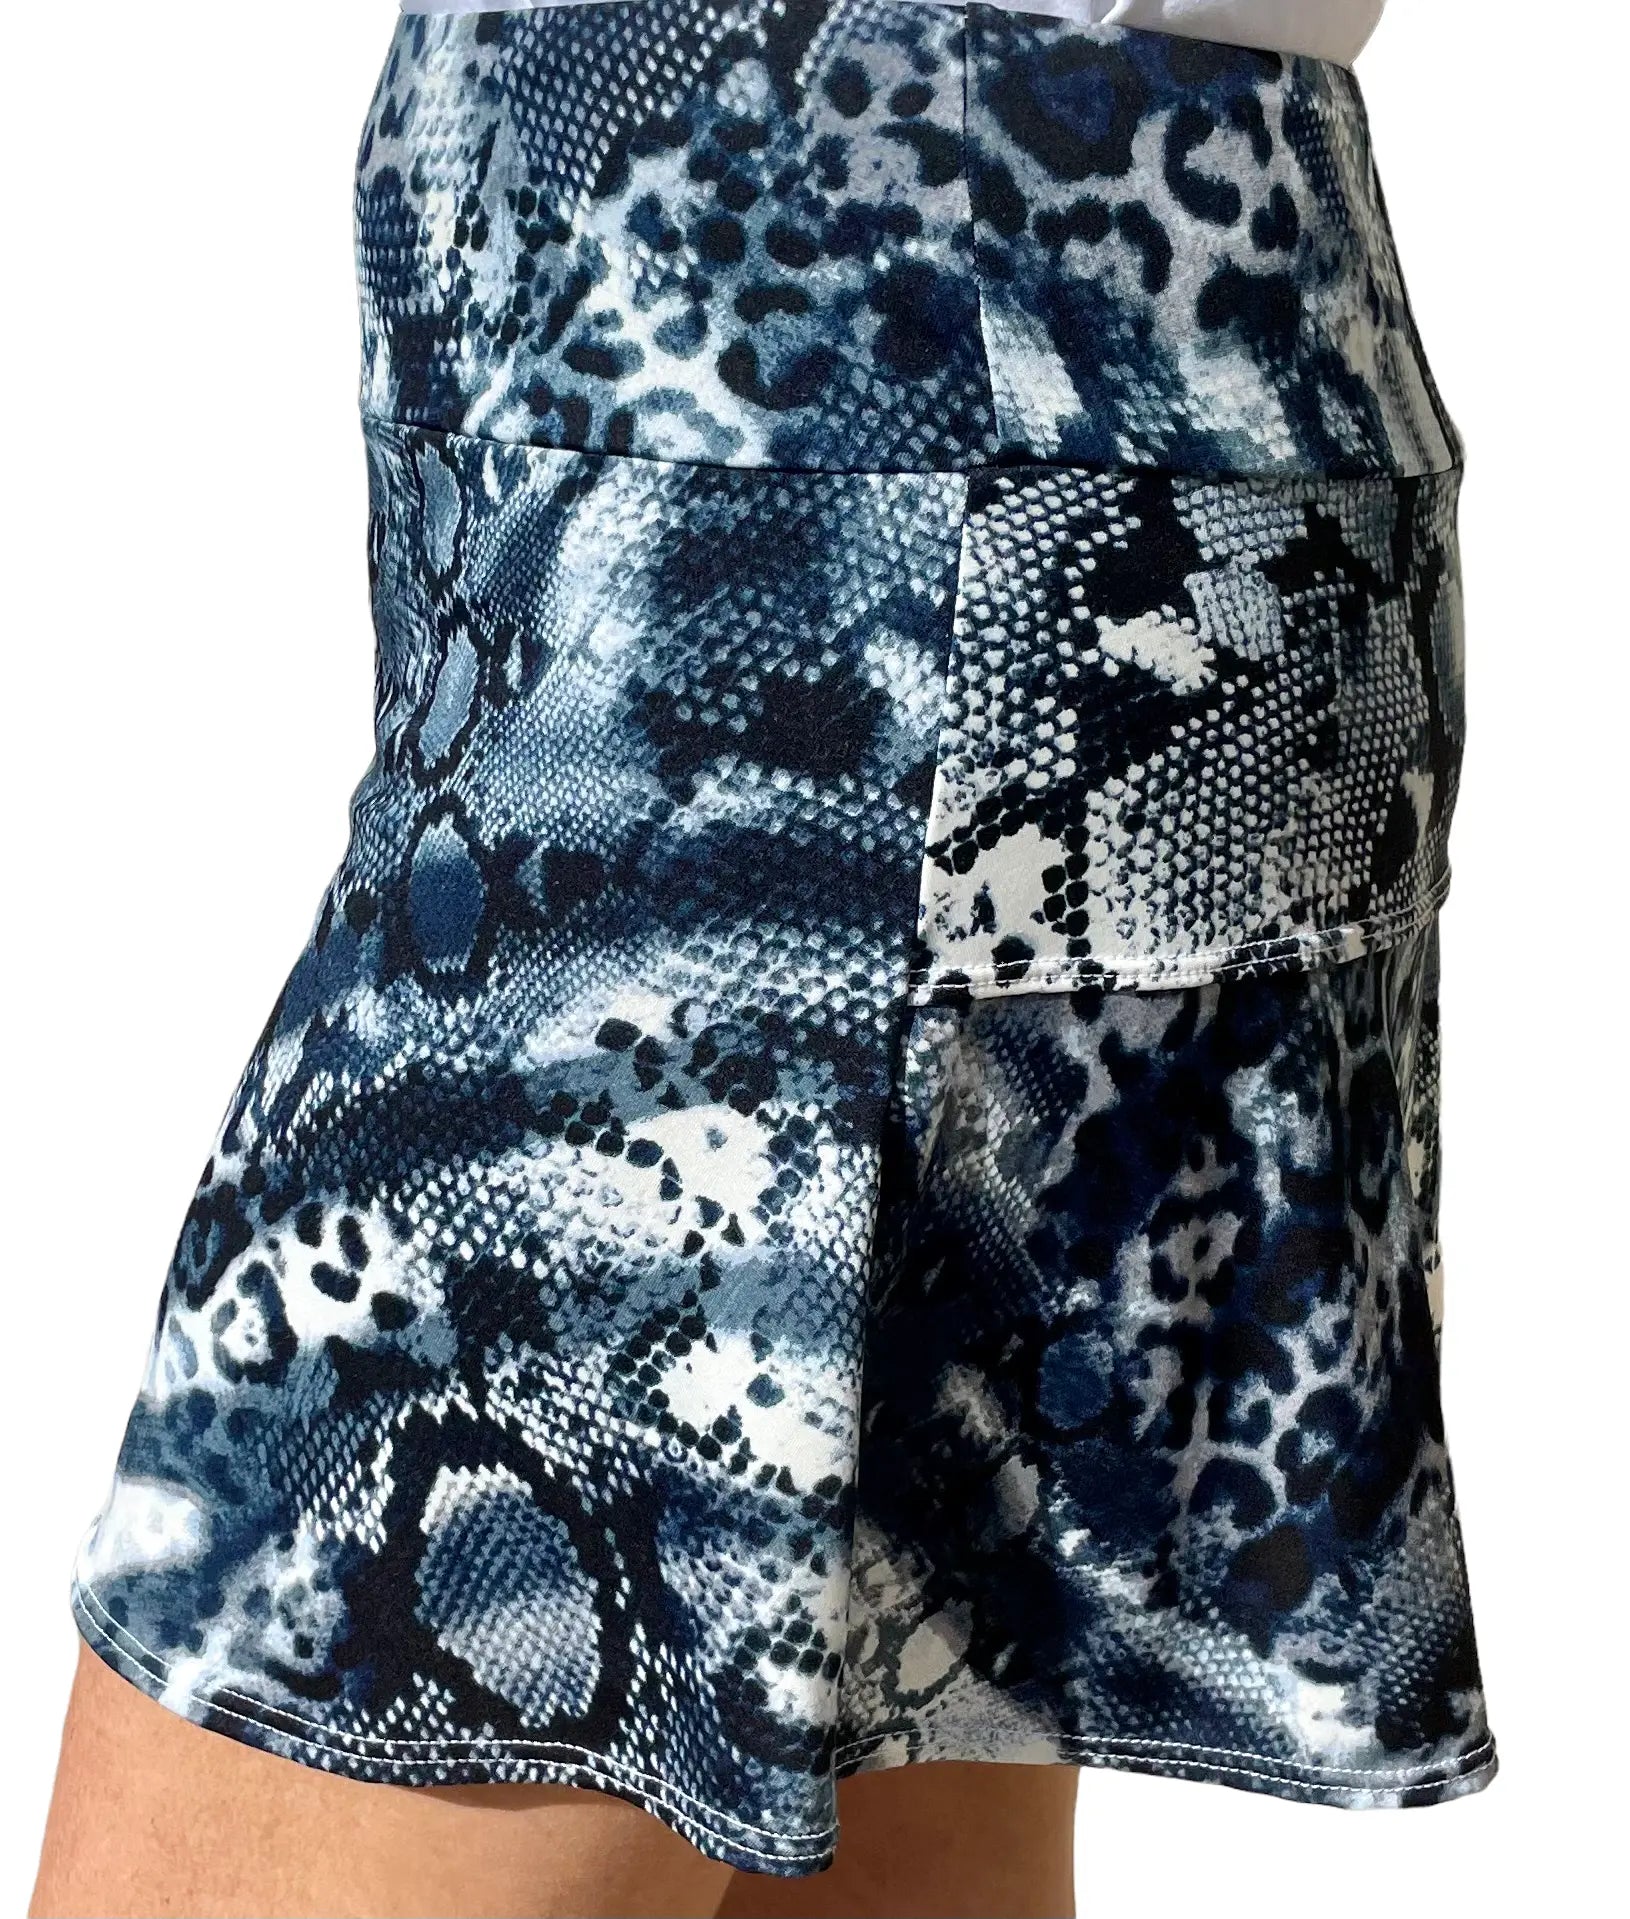 Sport skorts in animal print from Runway Athletics. Ultra-high compression classic black under-short with comfort gusset.